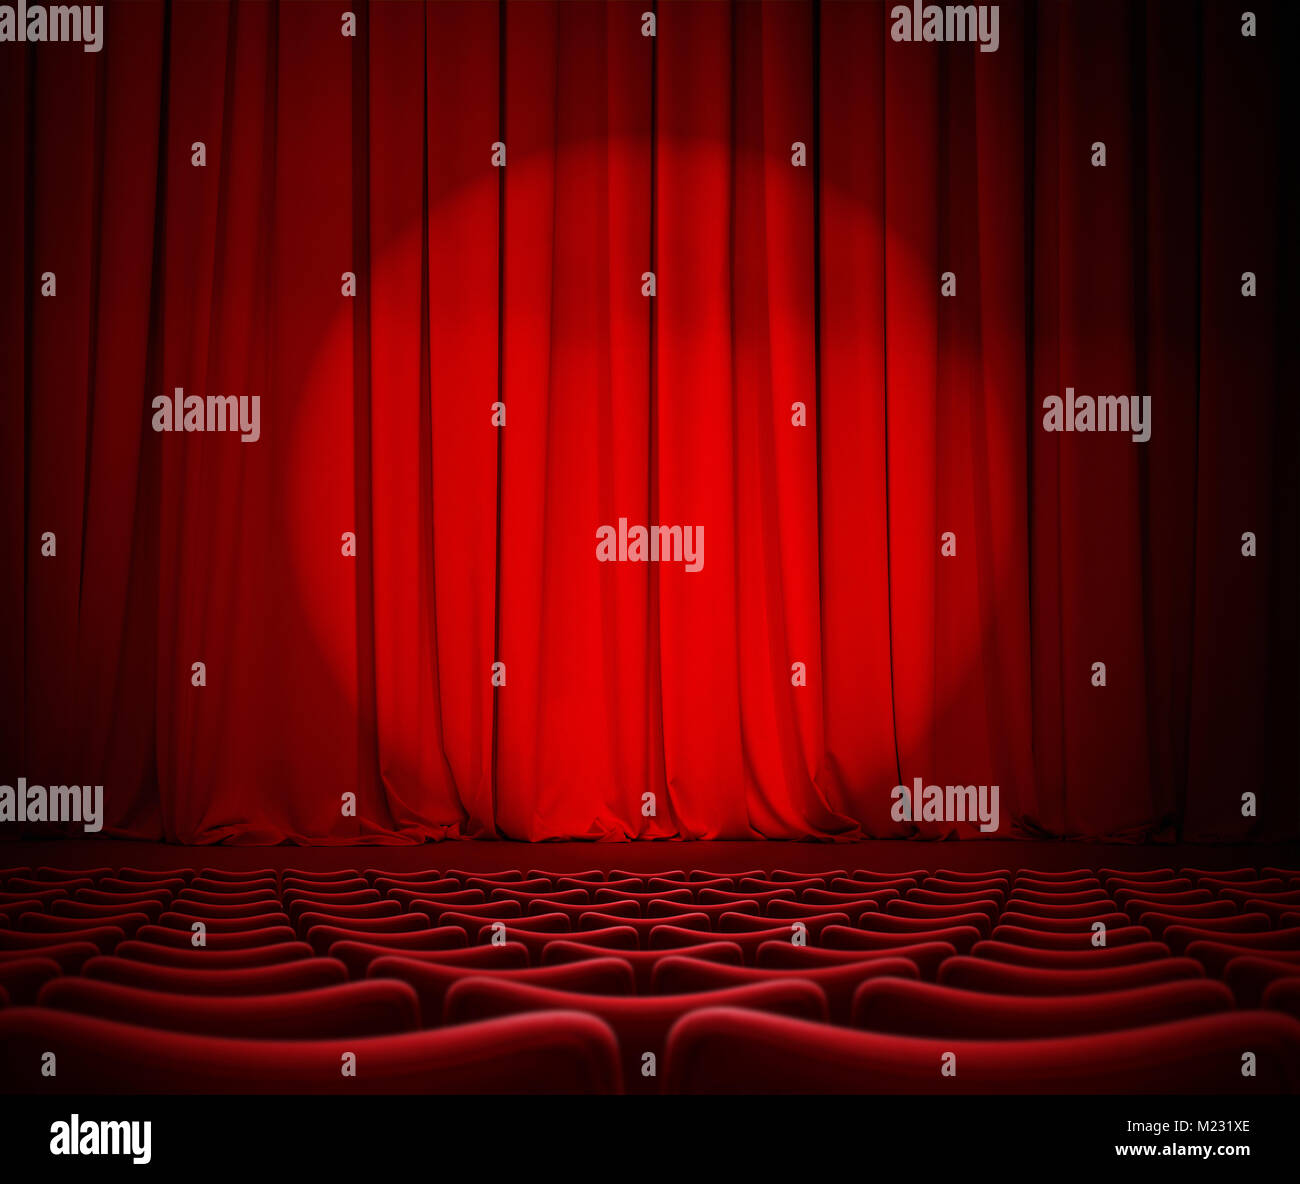 theater red curtains and seats 3d illustration Stock Photo